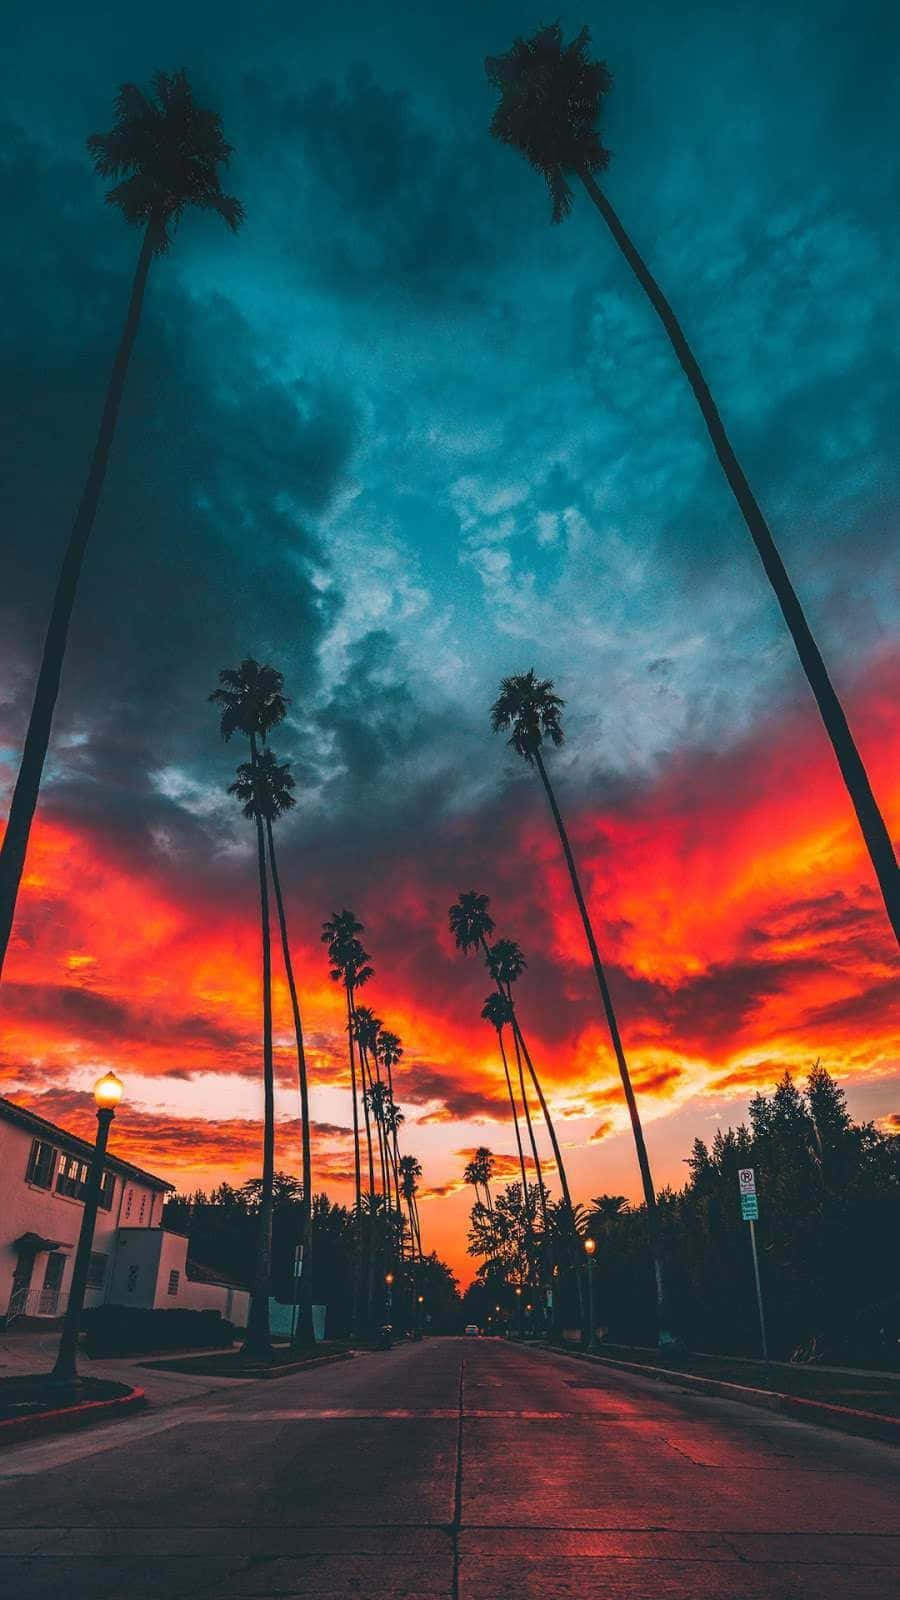 A Colorful Sunset With Palm Trees In The Background Wallpaper